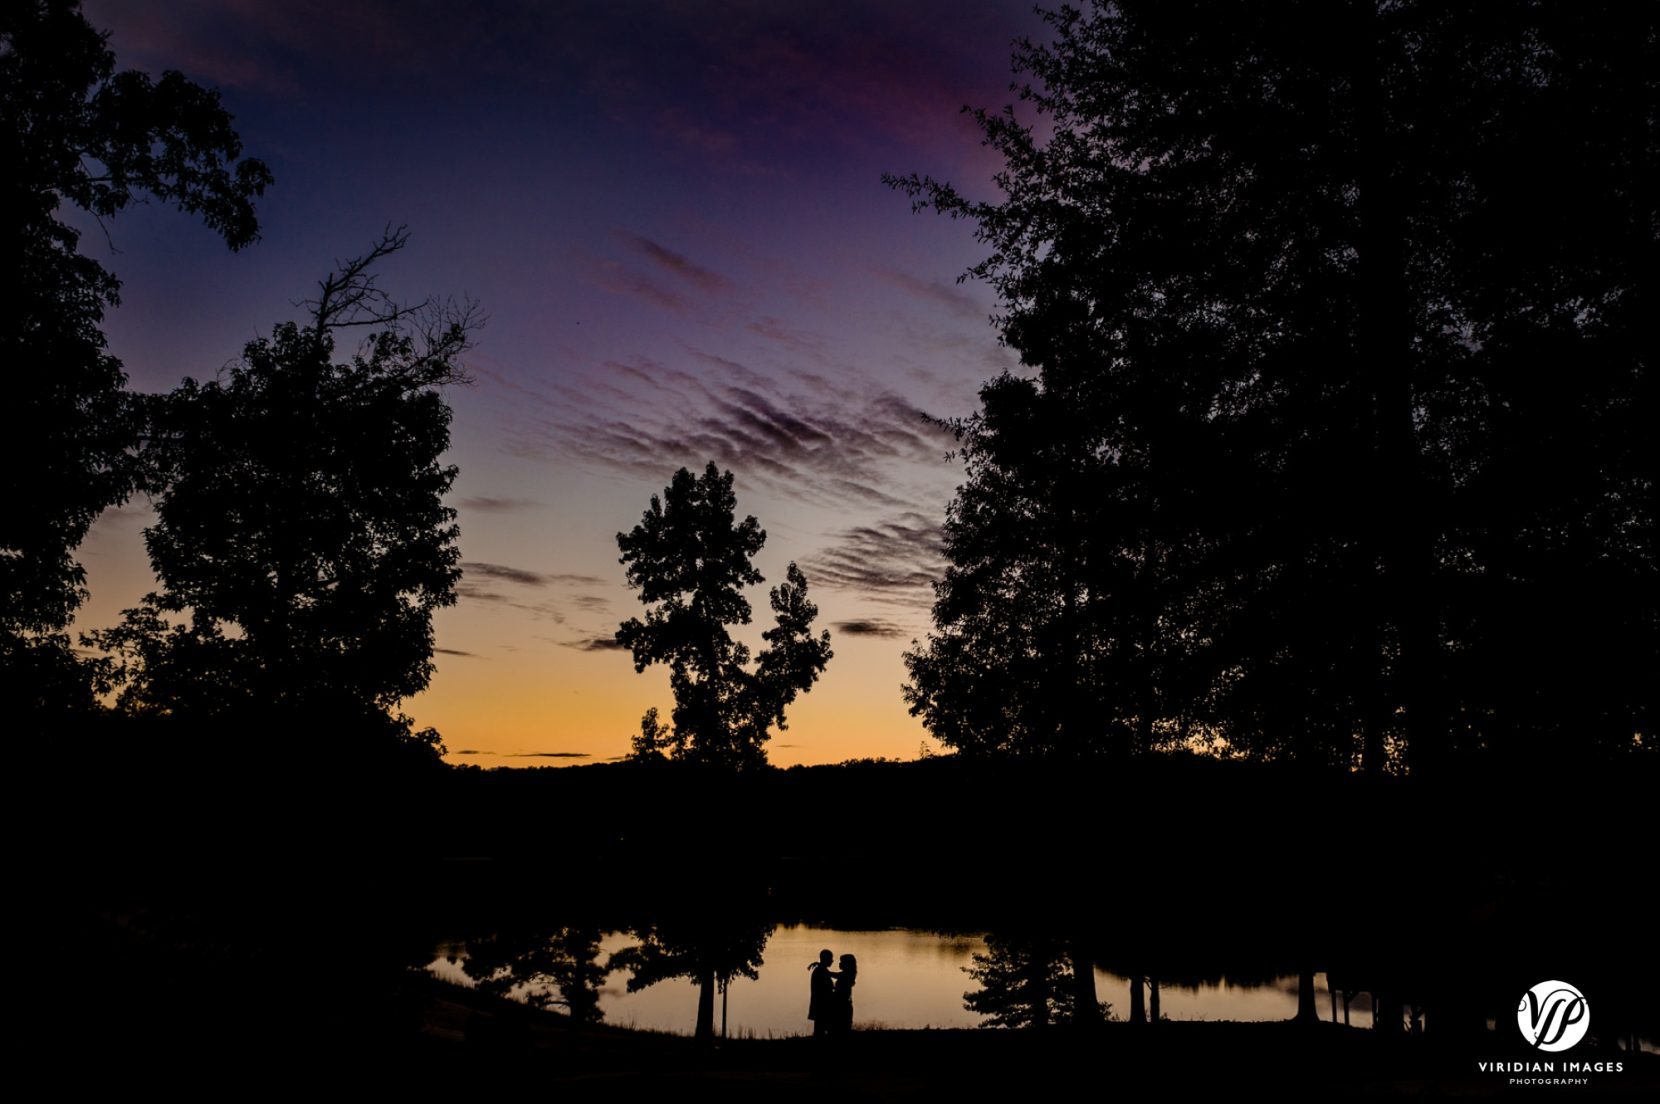 wide angle shot of couple silhouette against mirror reflected lake at sunset